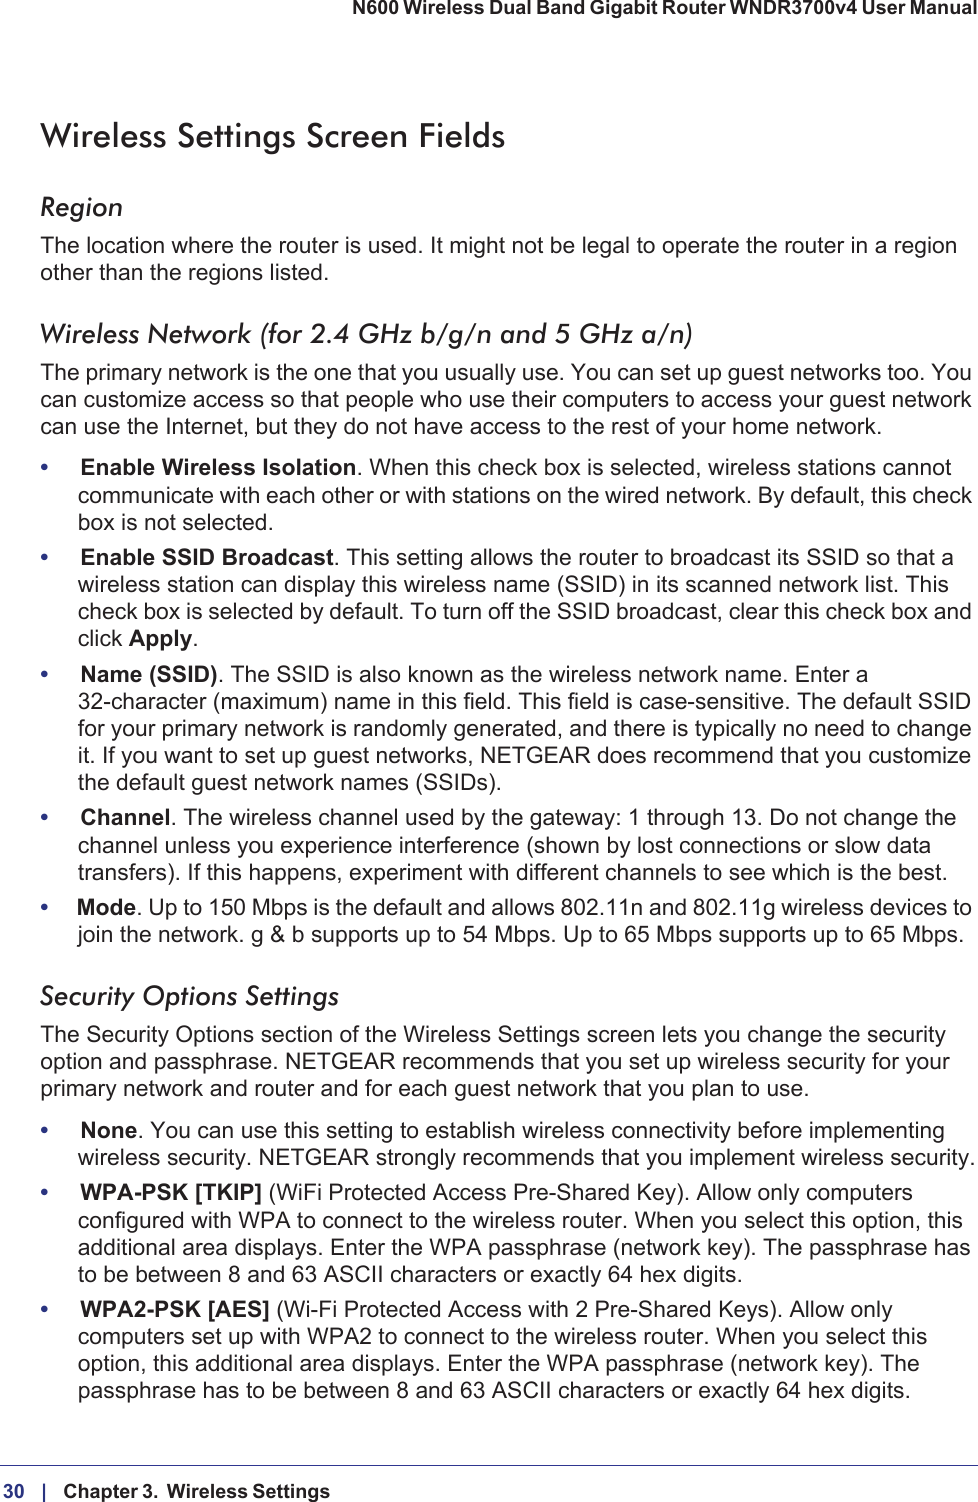 30 |    Chapter 3.  Wireless Settings N600 Wireless Dual Band Gigabit Router WNDR3700v4 User Manual Wireless Settings Screen FieldsRegionThe location where the router is used. It might not be legal to operate the router in a region other than the regions listed.Wireless Network (for 2.4 GHz b/g/n and 5 GHz a/n)The primary network is the one that you usually use. You can set up guest networks too. You can customize access so that people who use their computers to access your guest network can use the Internet, but they do not have access to the rest of your home network. •Enable Wireless Isolation. When this check box is selected, wireless stations cannot communicate with each other or with stations on the wired network. By default, this check box is not selected.•Enable SSID Broadcast. This setting allows the router to broadcast its SSID so that a wireless station can display this wireless name (SSID) in its scanned network list. This check box is selected by default. To turn off the SSID broadcast, clear this check box and click Apply.•Name (SSID). The SSID is also known as the wireless network name. Enter a 32-character (maximum) name in this field. This field is case-sensitive. The default SSID for your primary network is randomly generated, and there is typically no need to change it. If you want to set up guest networks, NETGEAR does recommend that you customize the default guest network names (SSIDs).•Channel. The wireless channel used by the gateway: 1 through 13. Do not change the channel unless you experience interference (shown by lost connections or slow data transfers). If this happens, experiment with different channels to see which is the best.•Mode. Up to 150 Mbps is the default and allows 802.11n and 802.11g wireless devices to join the network. g &amp; b supports up to 54 Mbps. Up to 65 Mbps supports up to 65 Mbps.Security Options SettingsThe Security Options section of the Wireless Settings screen lets you change the security option and passphrase. NETGEAR recommends that you set up wireless security for your primary network and router and for each guest network that you plan to use. •None. You can use this setting to establish wireless connectivity before implementing wireless security. NETGEAR strongly recommends that you implement wireless security.•WPA-PSK [TKIP] (WiFi Protected Access Pre-Shared Key). Allow only computers configured with WPA to connect to the wireless router. When you select this option, this additional area displays. Enter the WPA passphrase (network key). The passphrase has to be between 8 and 63 ASCII characters or exactly 64 hex digits.•WPA2-PSK [AES] (Wi-Fi Protected Access with 2 Pre-Shared Keys). Allow only computers set up with WPA2 to connect to the wireless router. When you select this option, this additional area displays. Enter the WPA passphrase (network key). The passphrase has to be between 8 and 63 ASCII characters or exactly 64 hex digits.